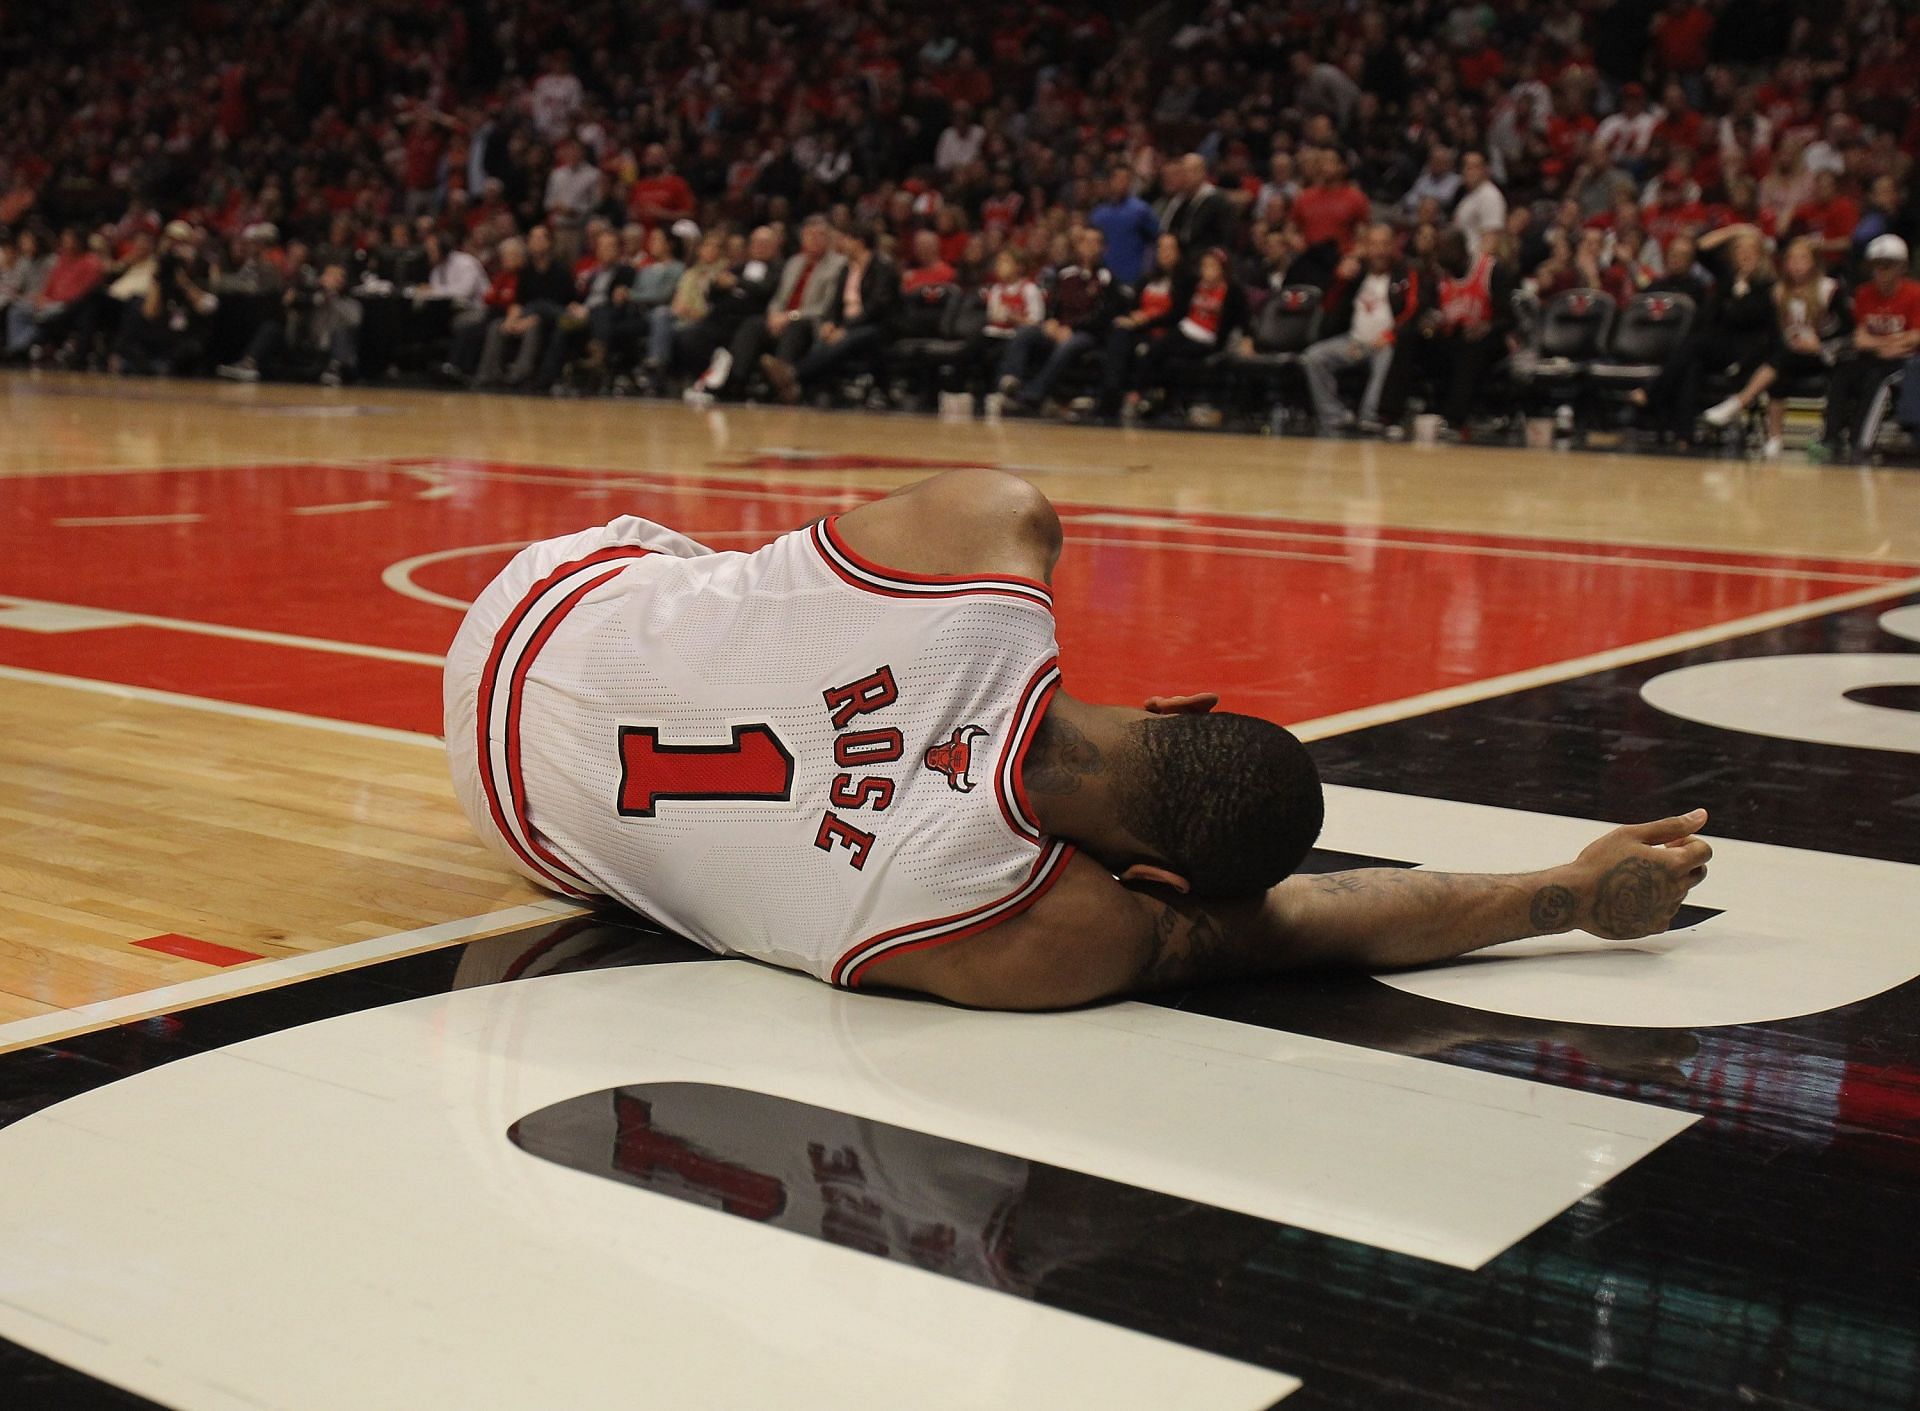 Derrick Rose suffered his first major injury in the 2012 NBA playoffs.